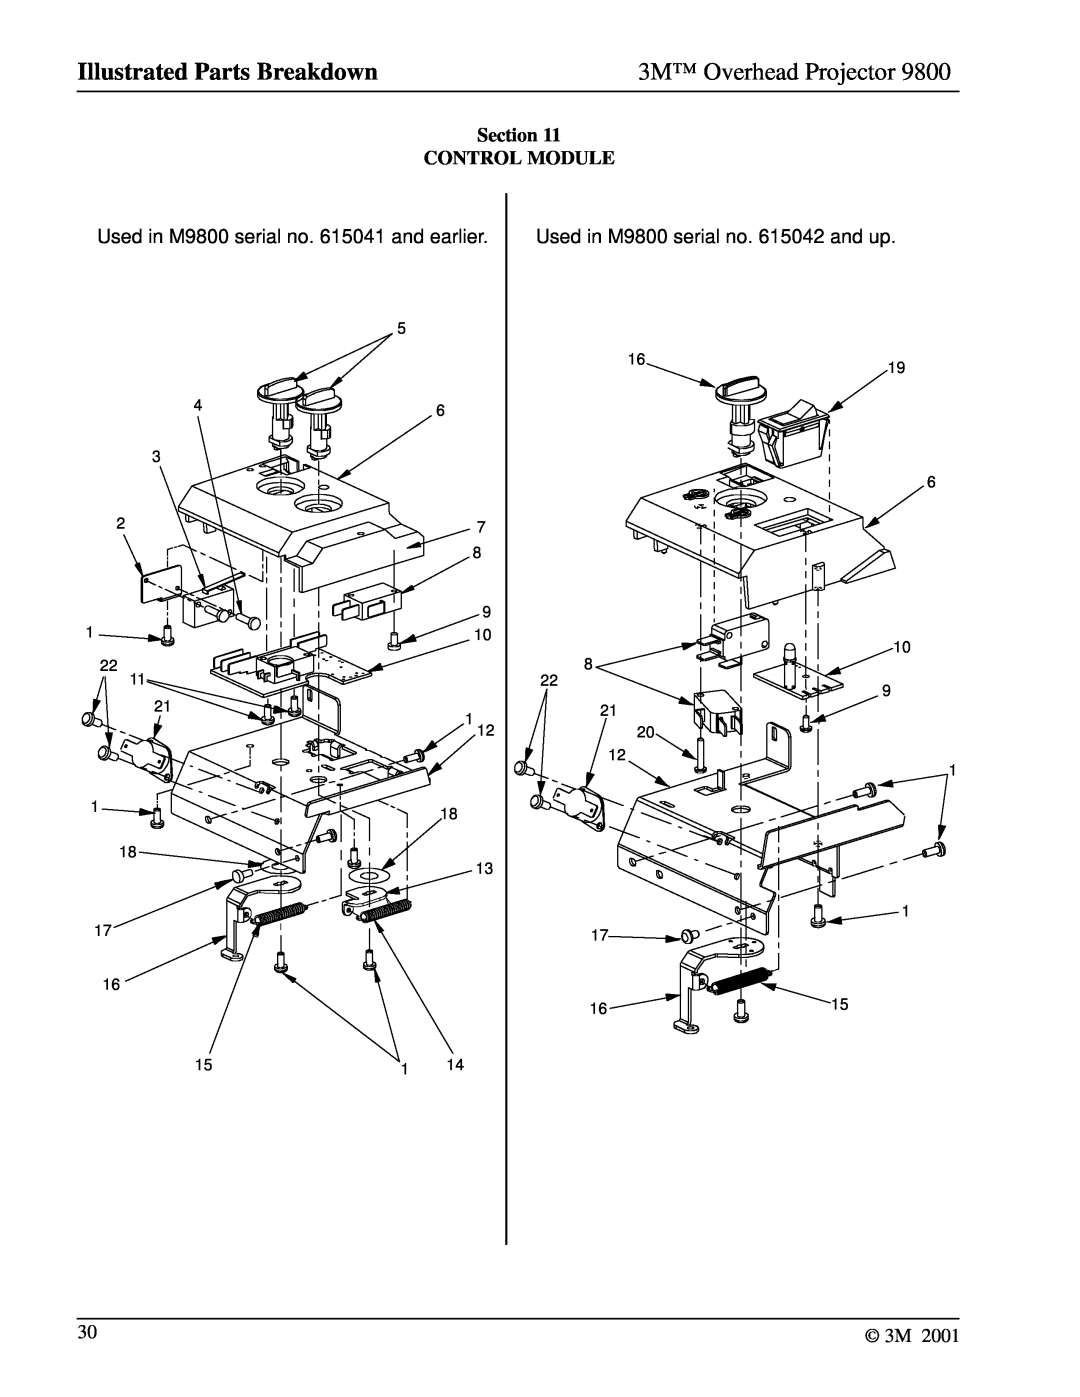 3M Section CONTROL MODULE, Illustrated Parts Breakdown, 3M Overhead Projector, Used in M9800 serial no. 615042 and up 